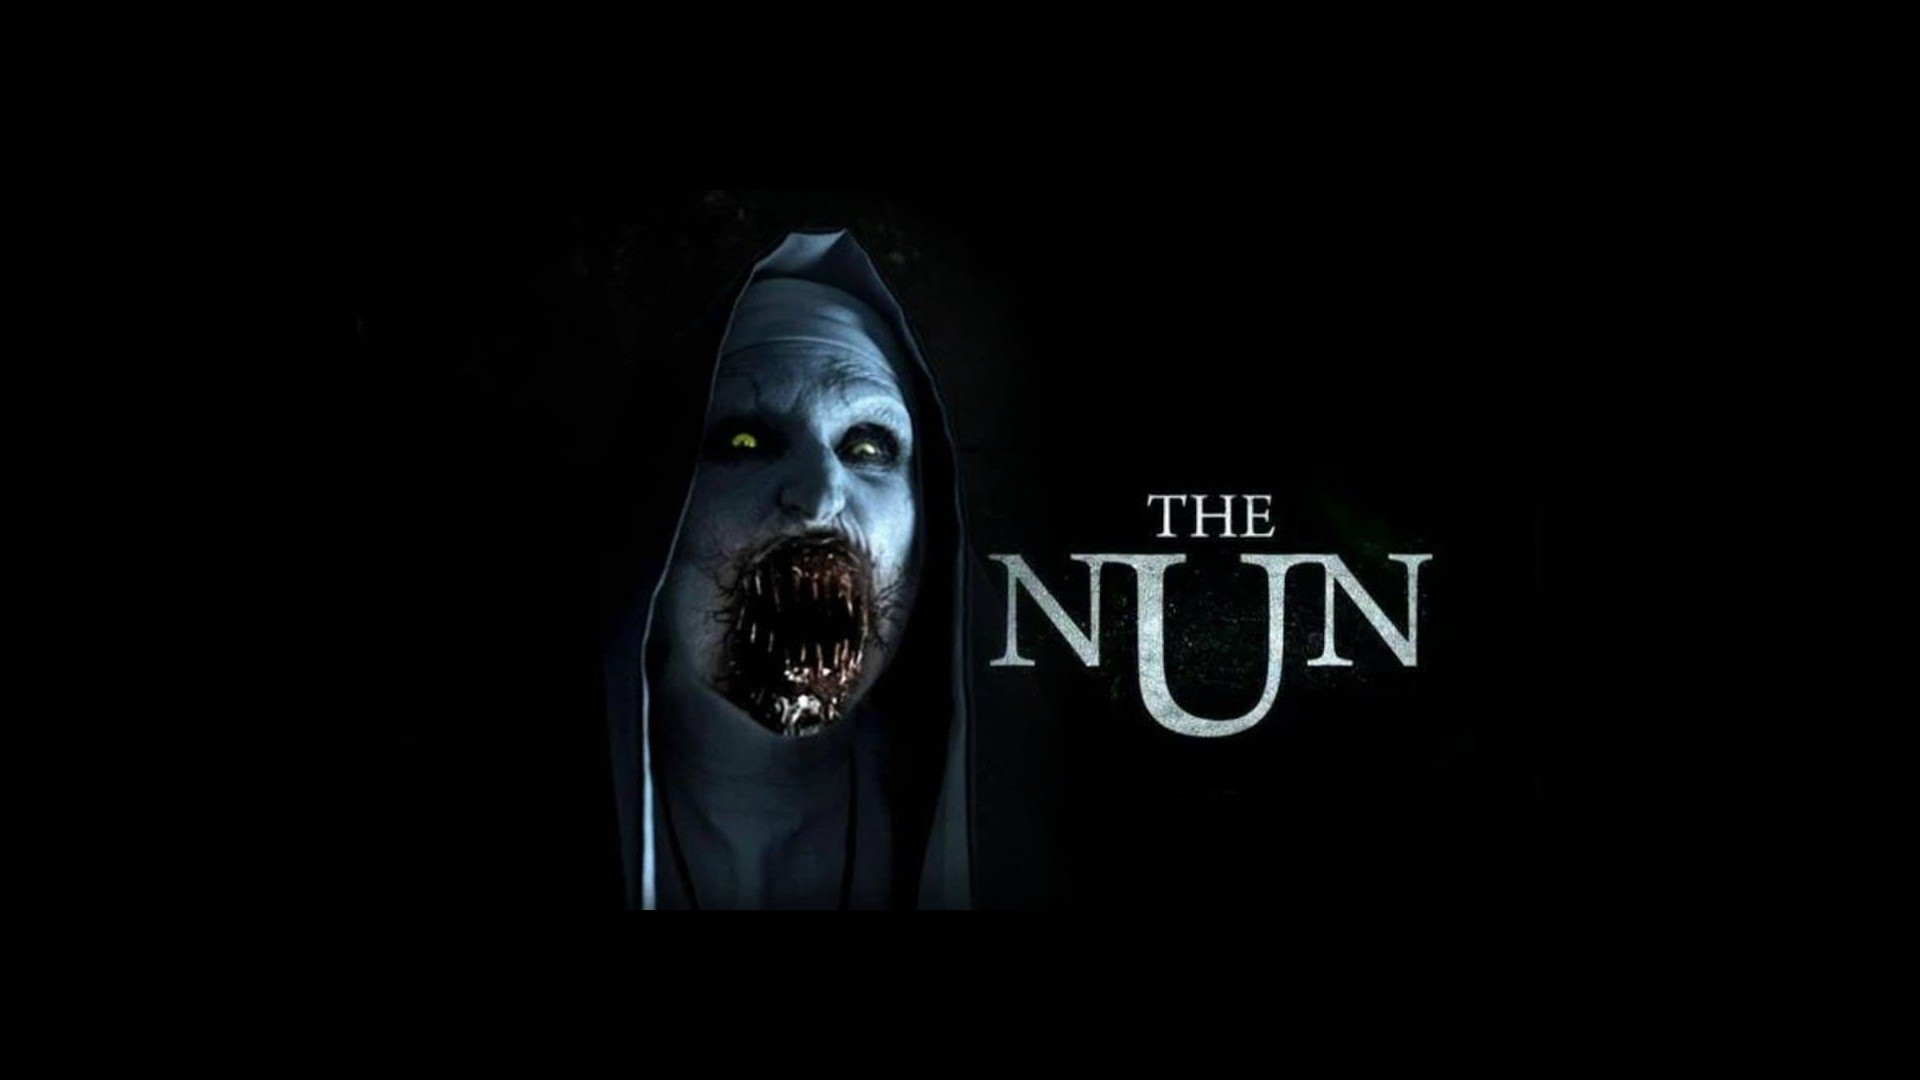 Wallpaper The Nun Valak with image resolution 1920x1080 pixel. You can use this wallpaper as background for your desktop Computer Screensavers, Android or iPhone smartphones